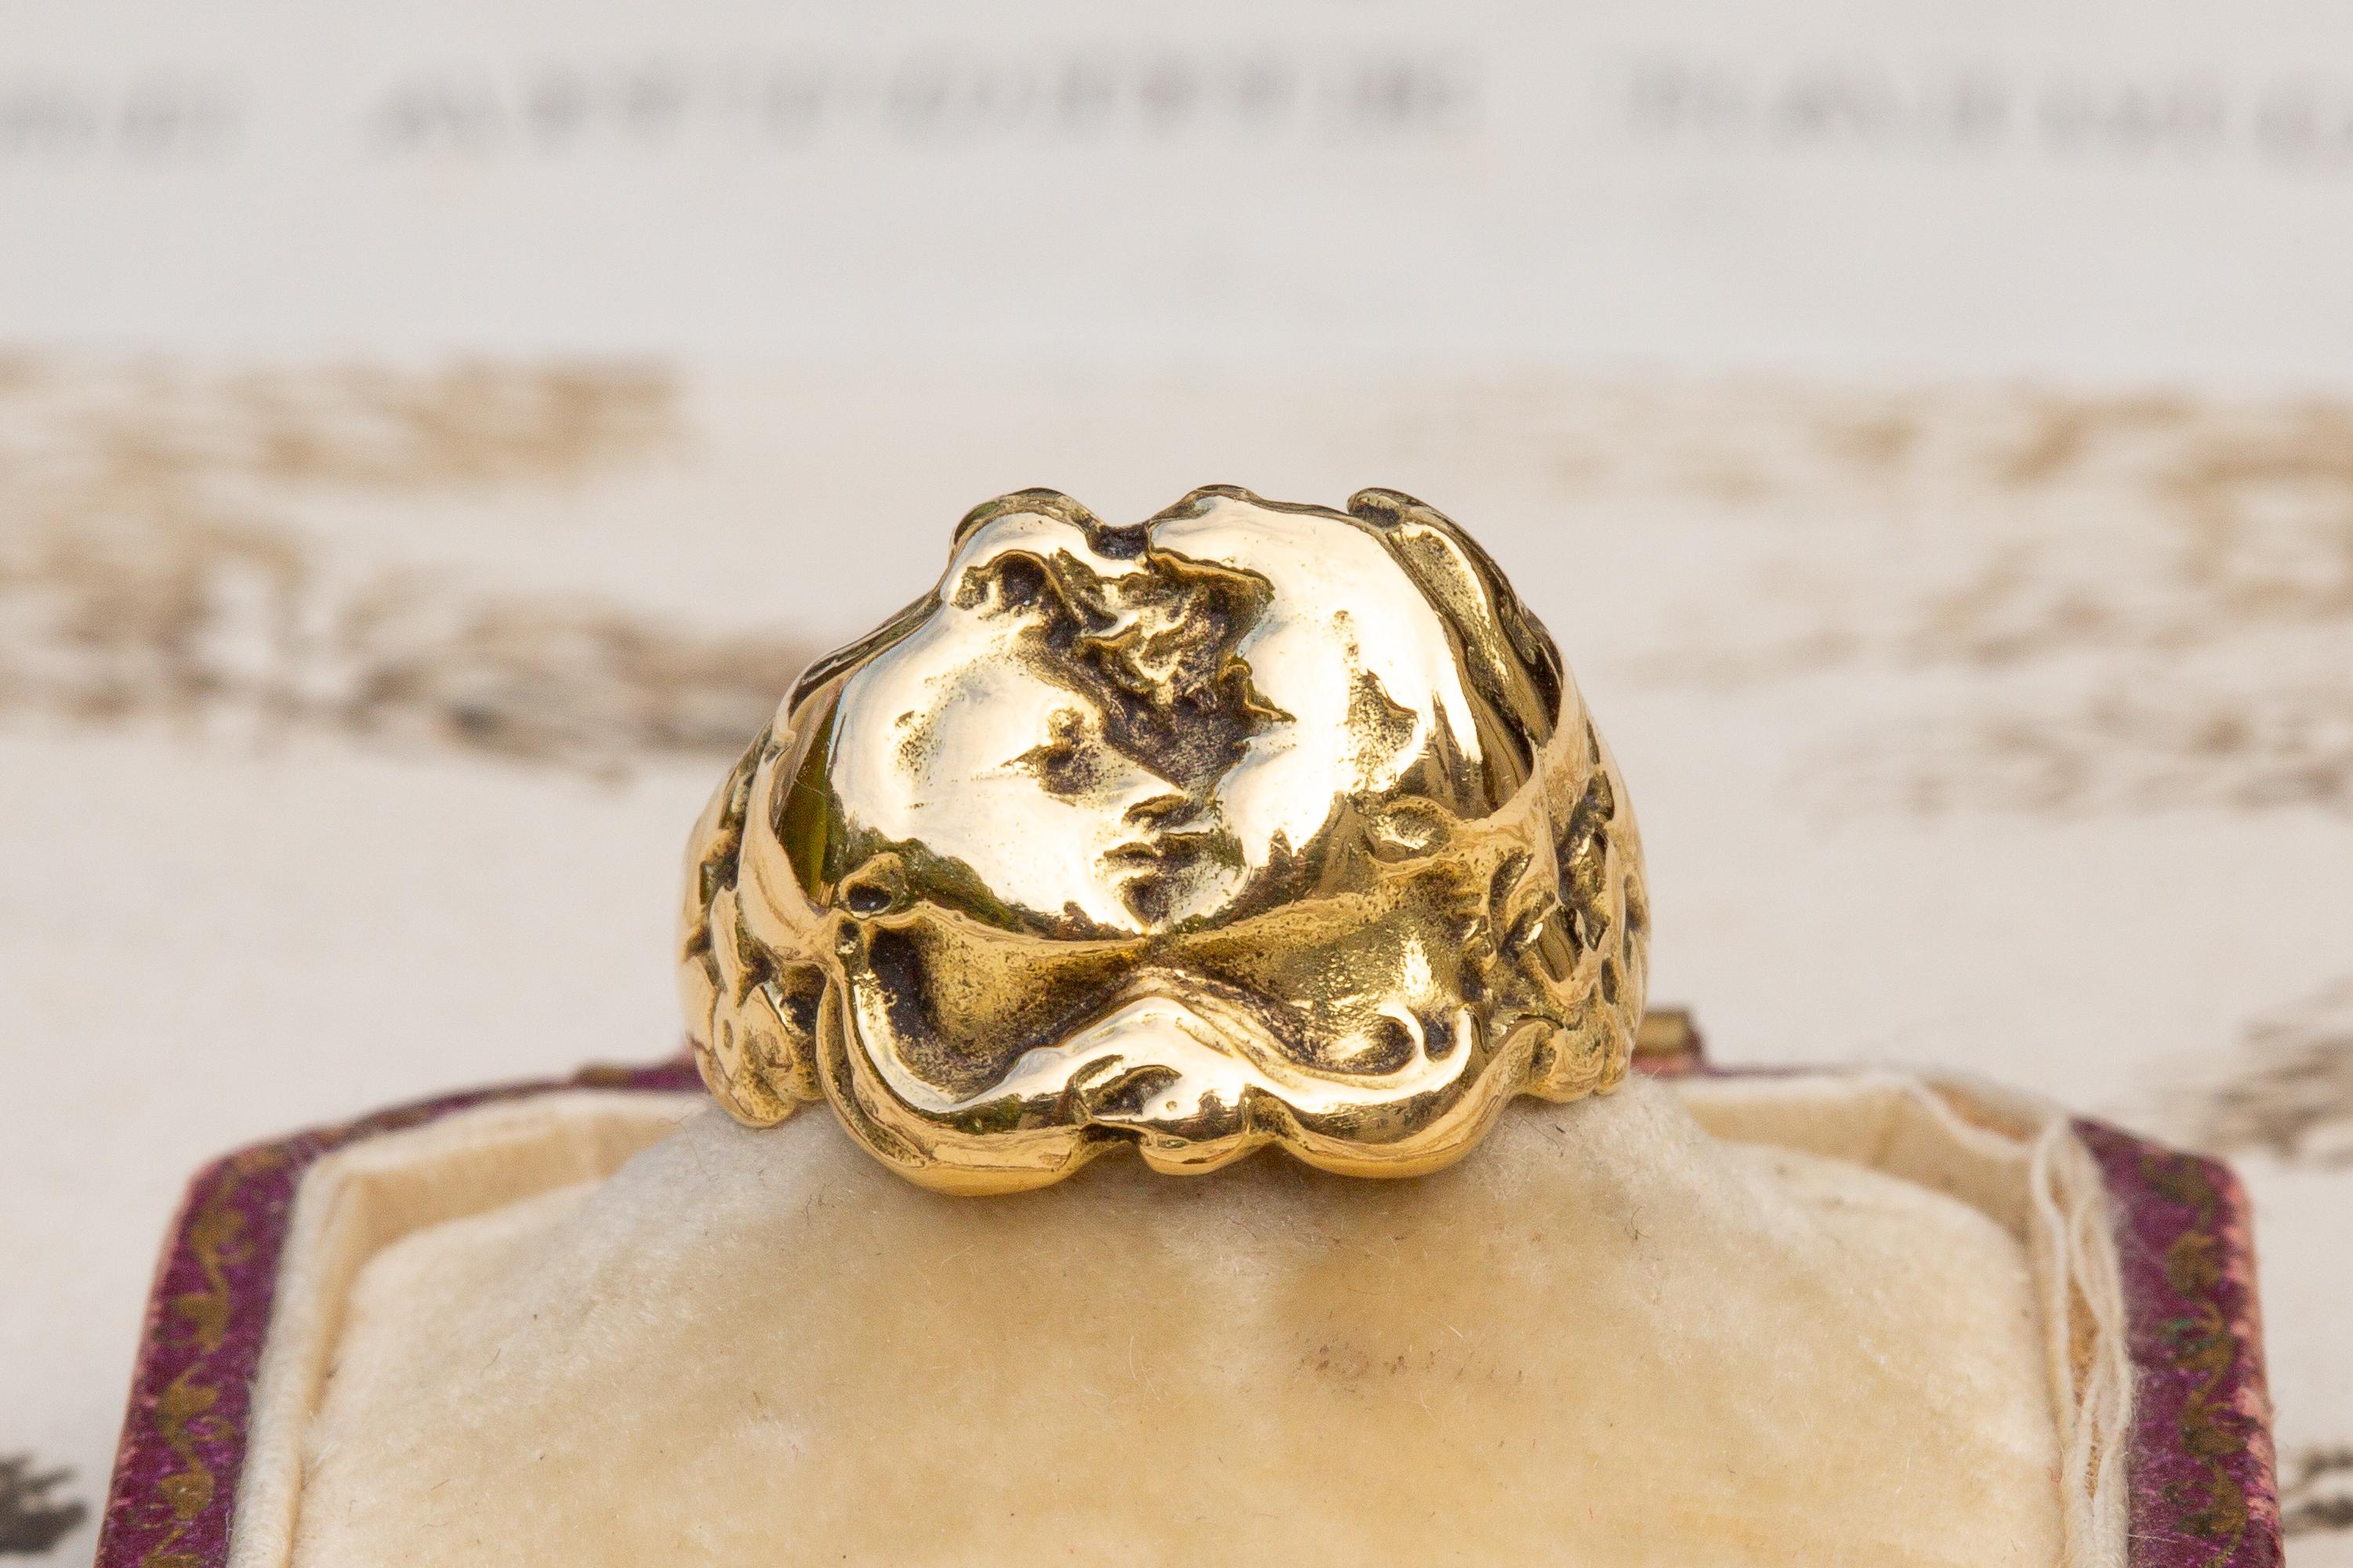 An iconic example of French Art Nouveau jewellery, this sculptural statement ring was made in Paris and dates to circa 1910. This unusual figural ring is crafted in 18K yellow gold and features two relief rendered faces pressed up against each other